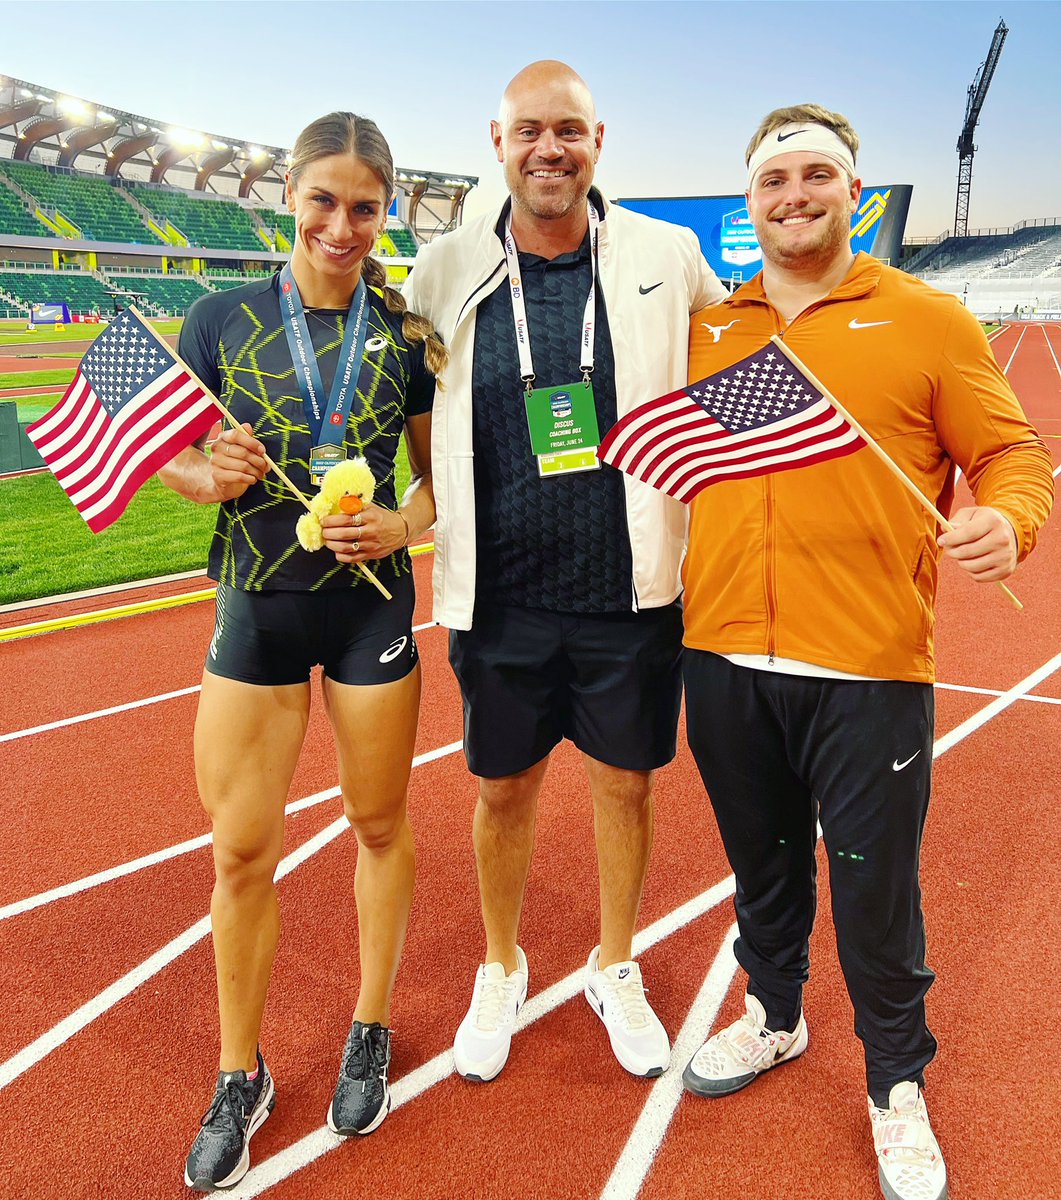 TWO 🌎 CHAMPIONSHIPS QUALIFIERS‼️🇺🇸

What an EPIC evening!

Valarie Allman - 🥇 (66.92m / 219-7)
Tripp Piperi - 4th (21.43m / 70-3.75)
•
#ThrowsBySion